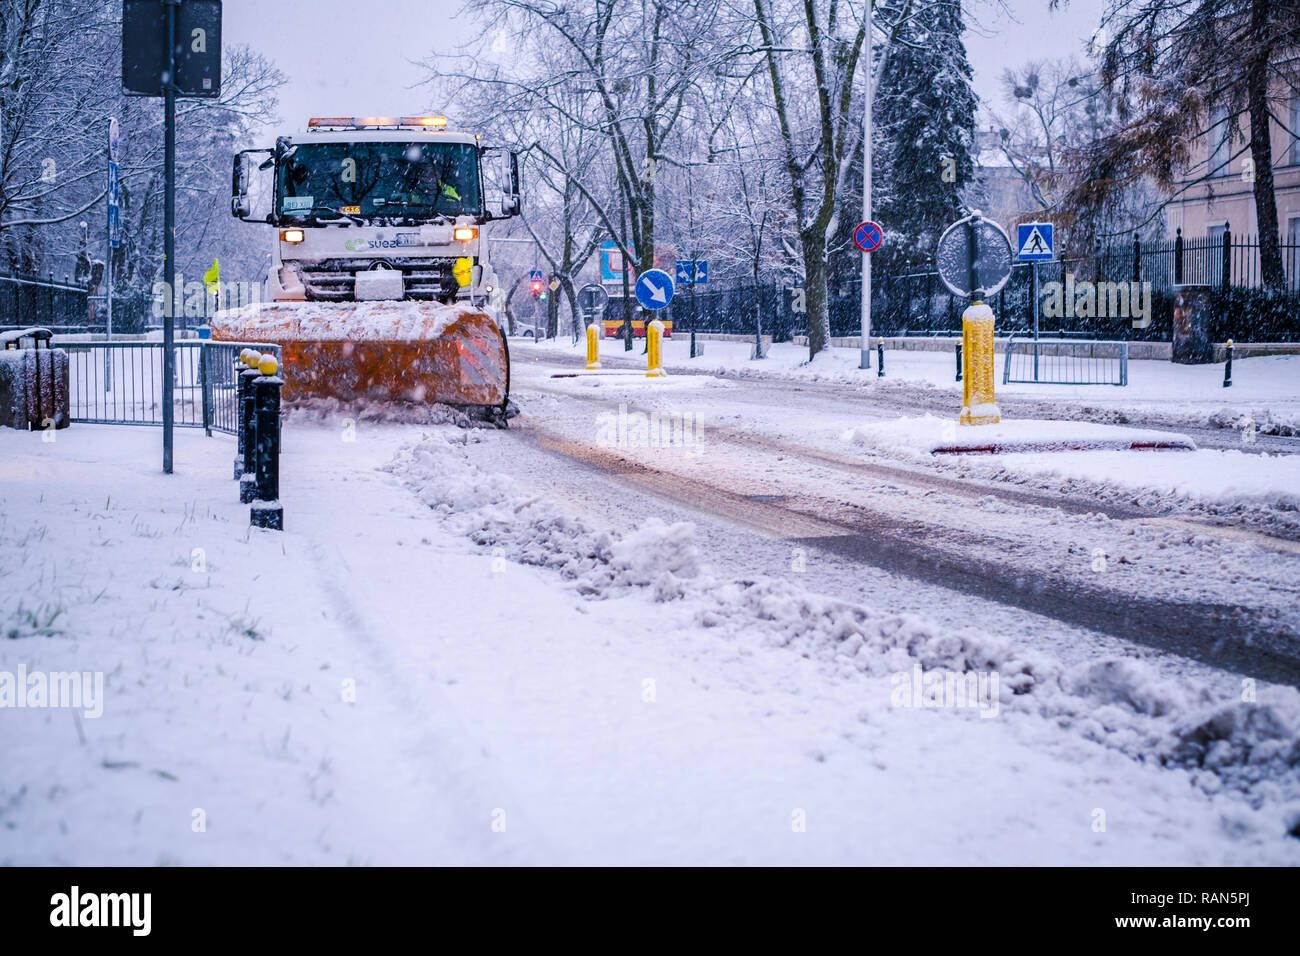 Warsaw, Poland. 5th January, 2019. Winter is back again. Snow plow is  struggling with fresh snowfall on streets of Mokotow, upscale district of  Warsaw. Robert Pastryk / Alamy Live News Stock Photo - Alamy